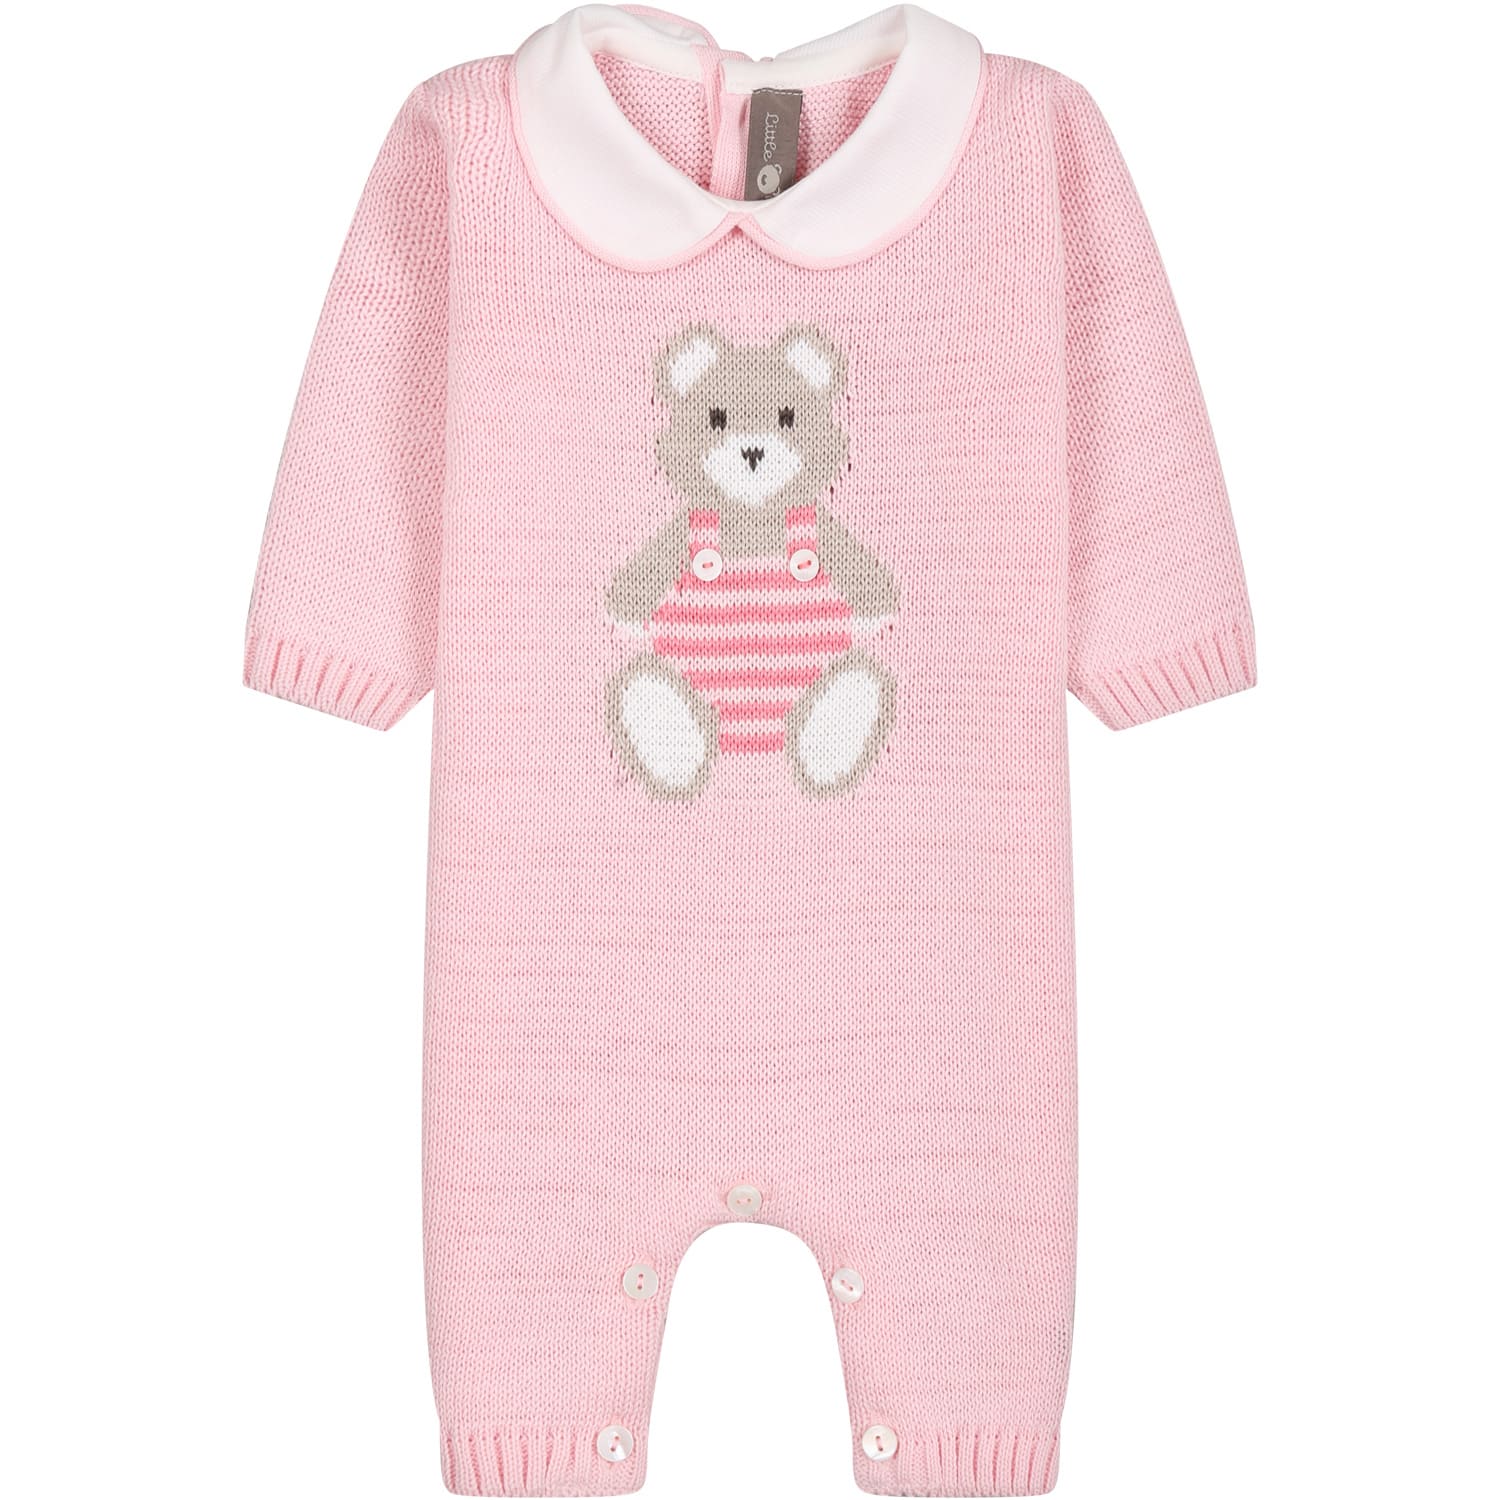 LITTLE BEAR PINK ROMPER FOR BABY GIRL WITH BEAR